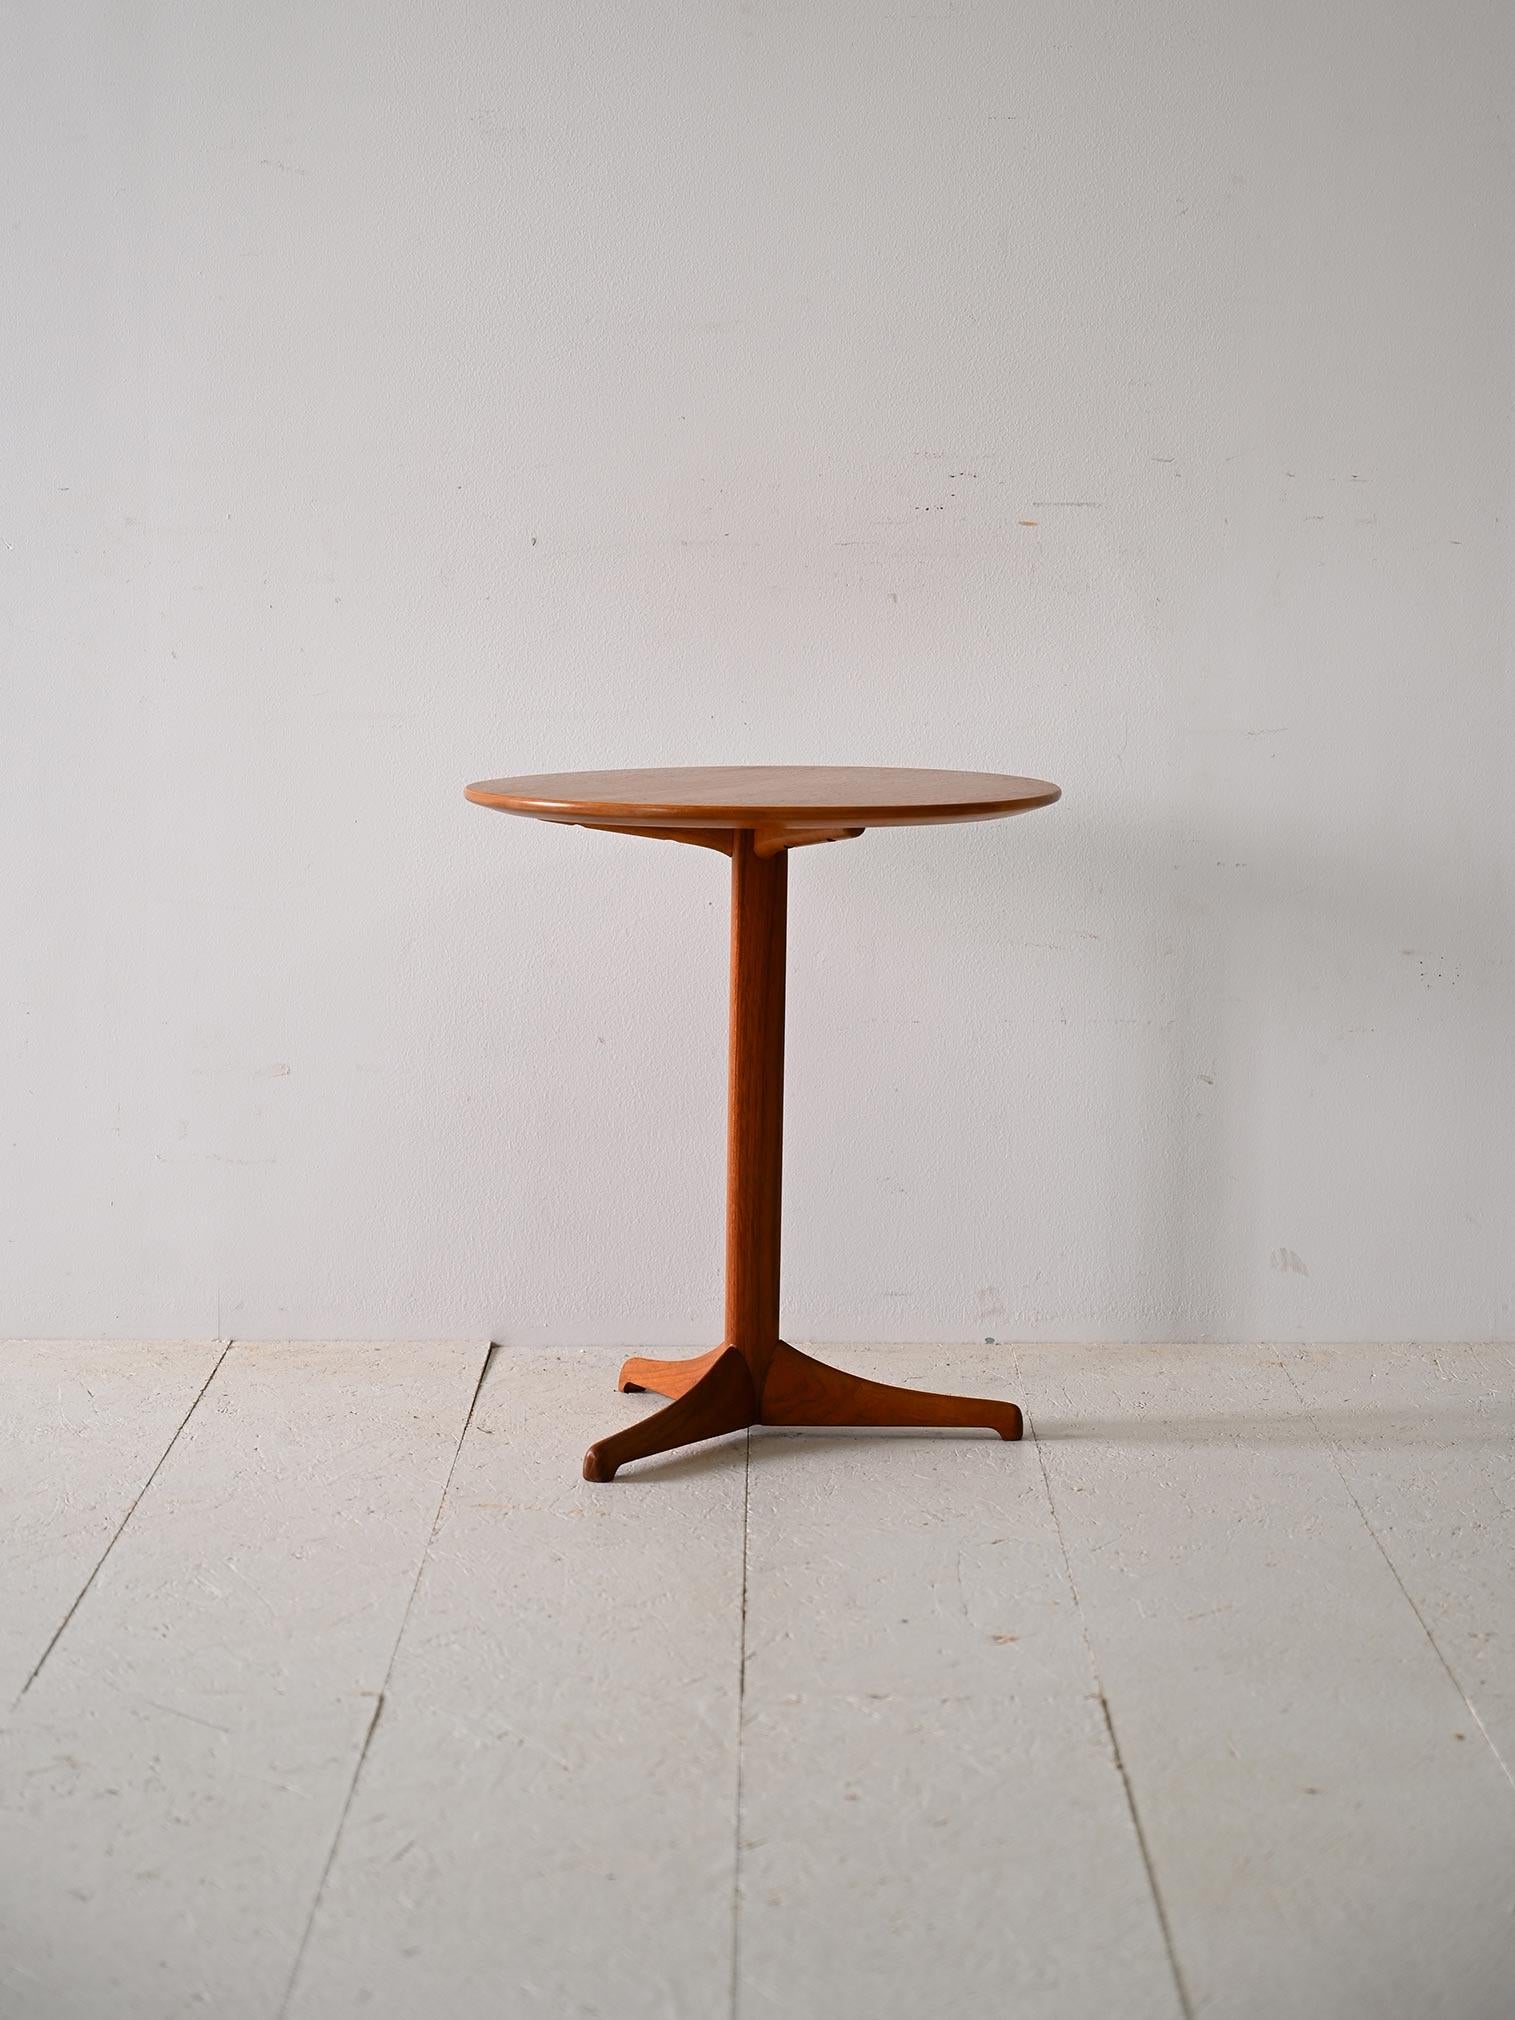 Scandinavian vintage teak round table from the 1950s.

This teak table is a fine example of Scandinavian design with its minimal, clean lines typical of the 1960s.

Designed by Kerstin Hörlin-Holmquist for NK in the 1950s.

 Its compact size makes